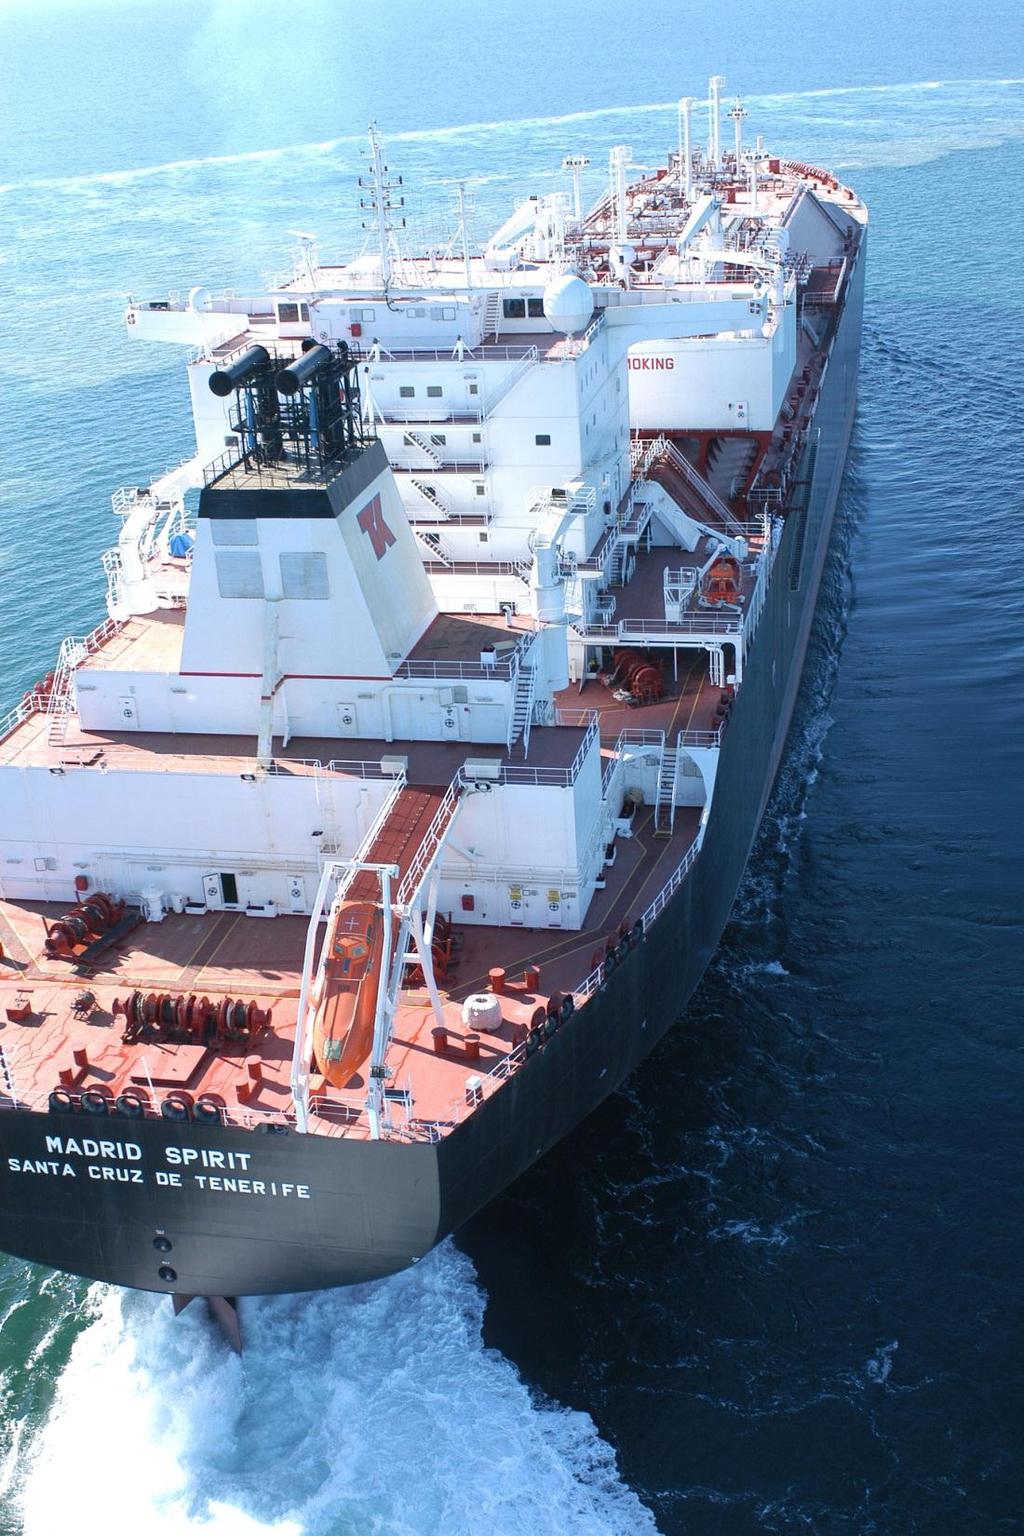 Teekay LNG at a Glance Provider of LNG, LPG and crude oil marine transportation primarily under long-term, fee-based contracts Contracts not linked to, or exposed to commodity prices Common